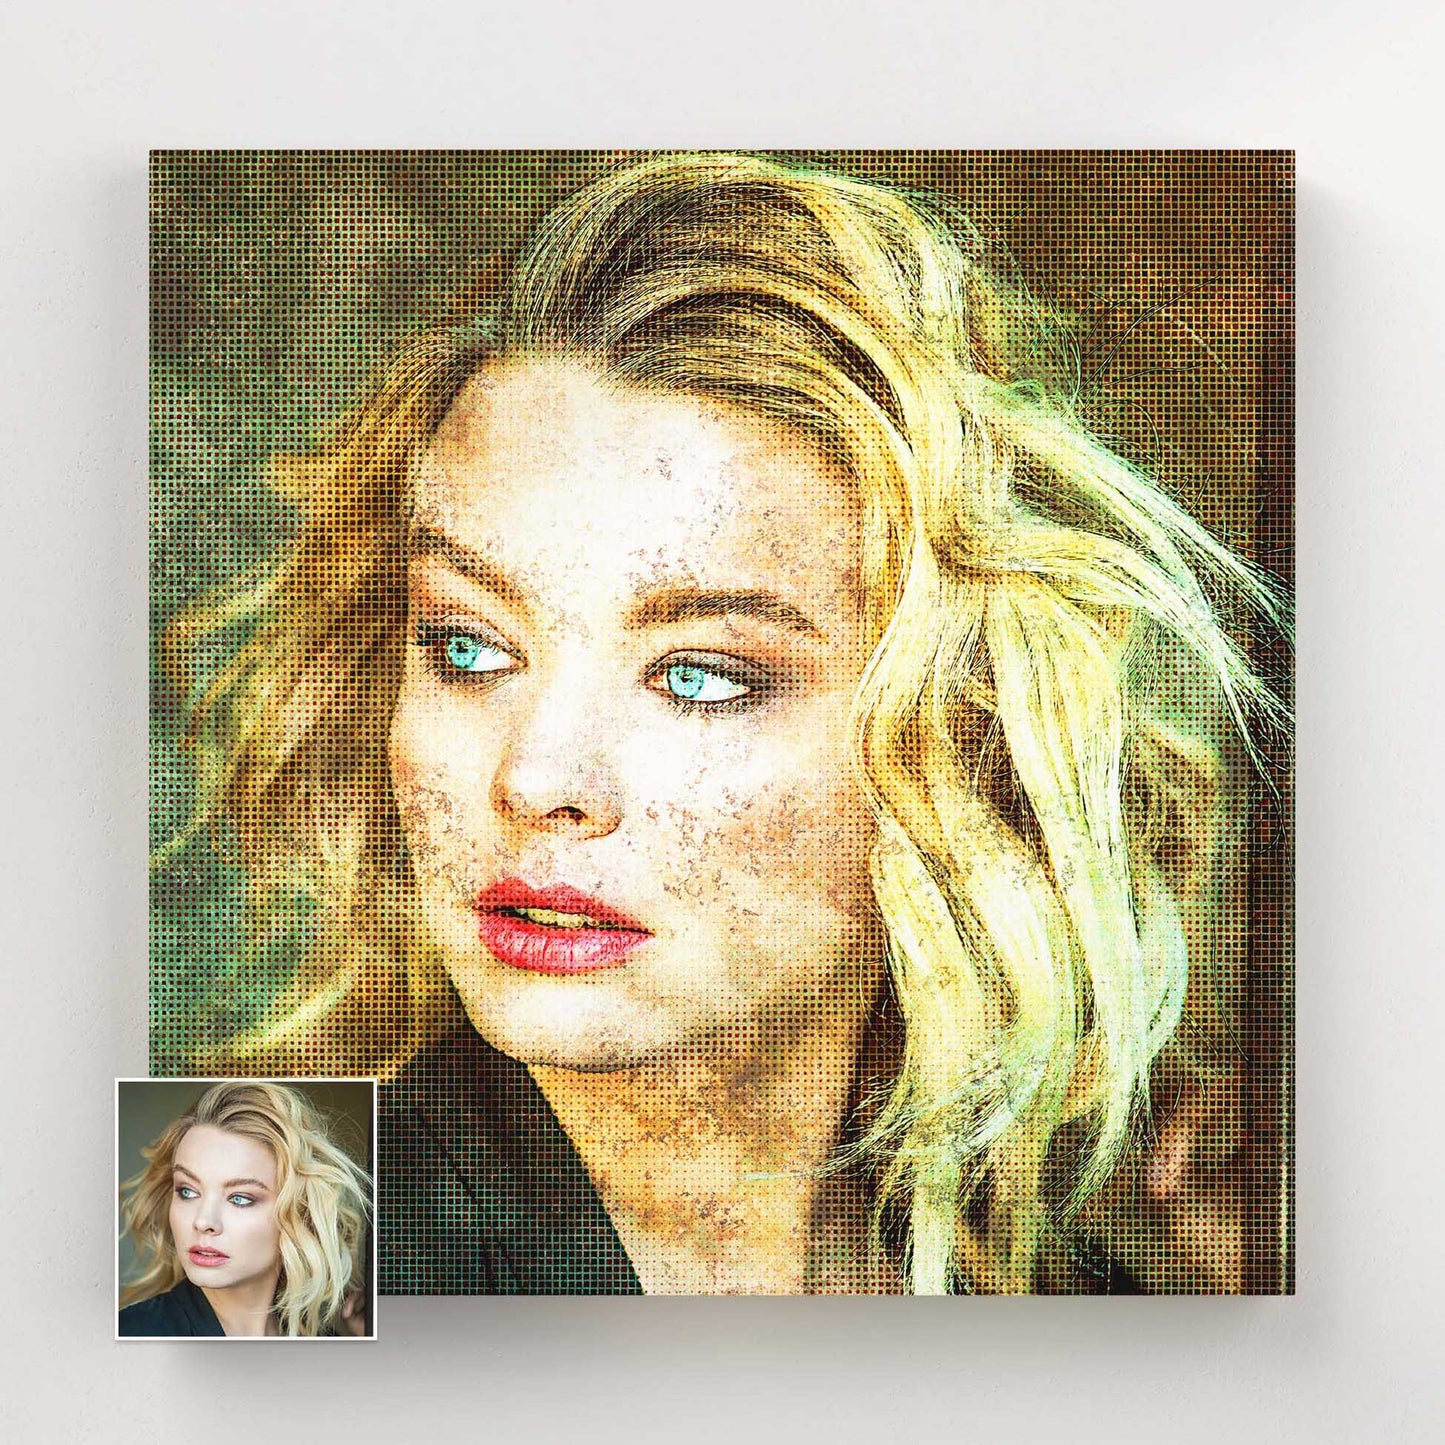 Immerse yourself in the creative energy of our Personalised Retro Grunge FX Canvas. Its cool and trendy 90s vibe, captured through a unique print from your photo, adds a novelty factor to your home decor